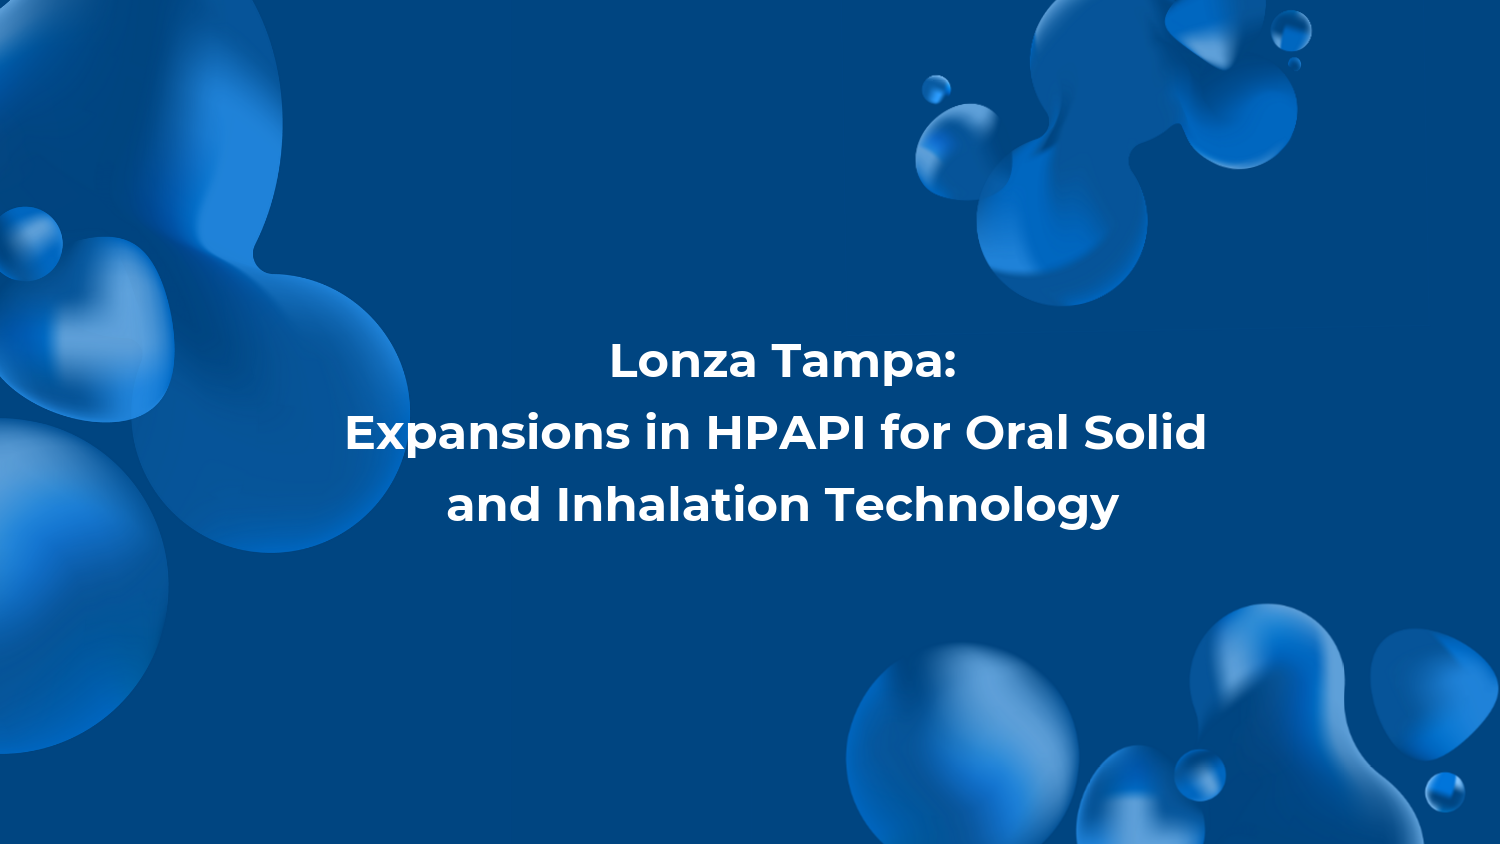 Lonza Tampa - Expansions in HPAPI for Oral Solid and Inhalation Technology